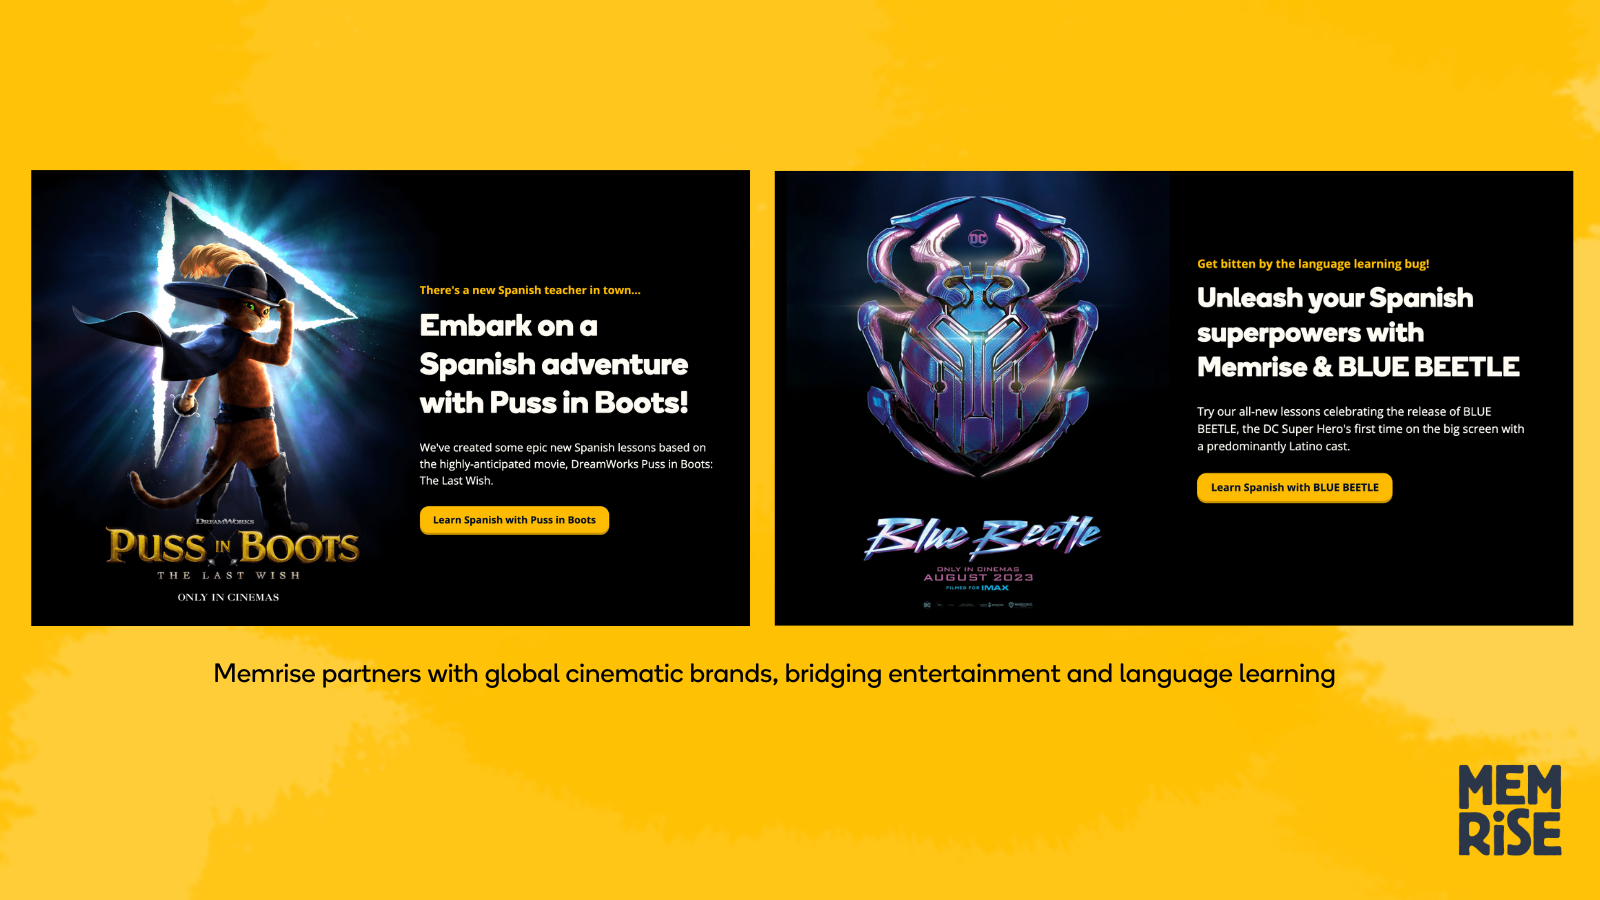 Screenshots of Memrise landing pages. One shows the partnership with Bluee Beetle, the other one shows the partnership with Puss in Boots.